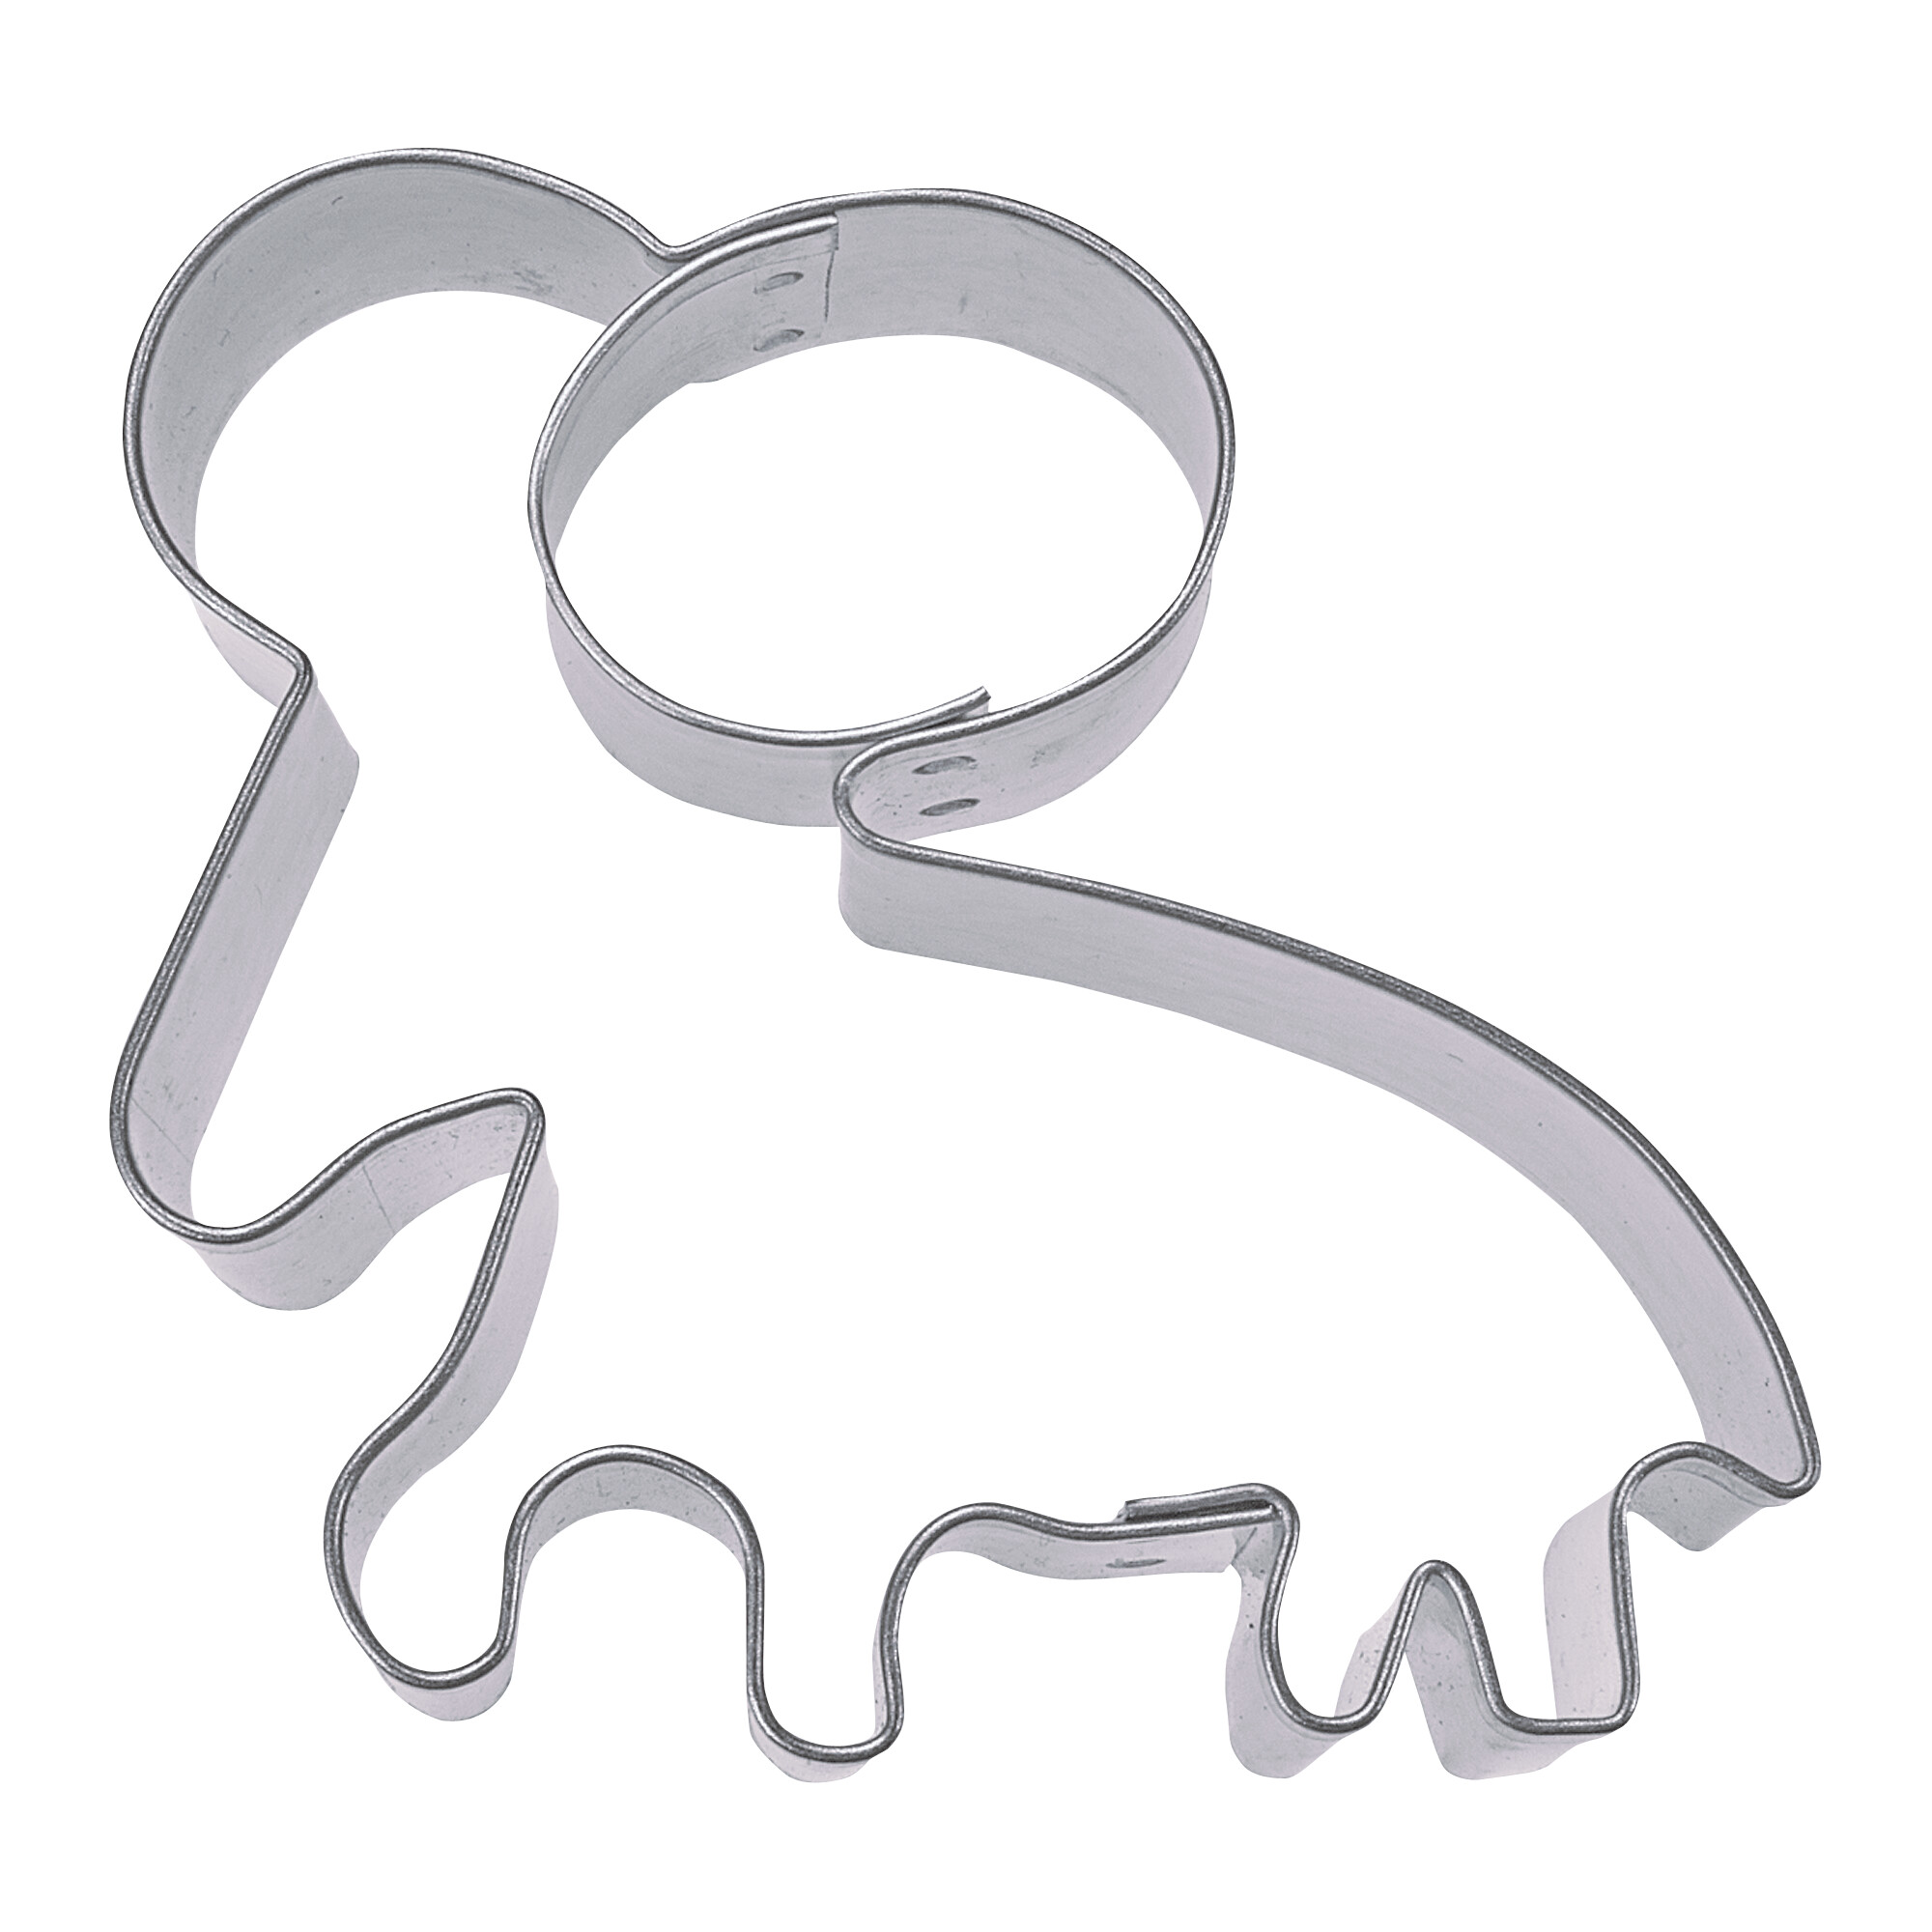 Cookie cutter with stamp – Sign of the zodiac ram